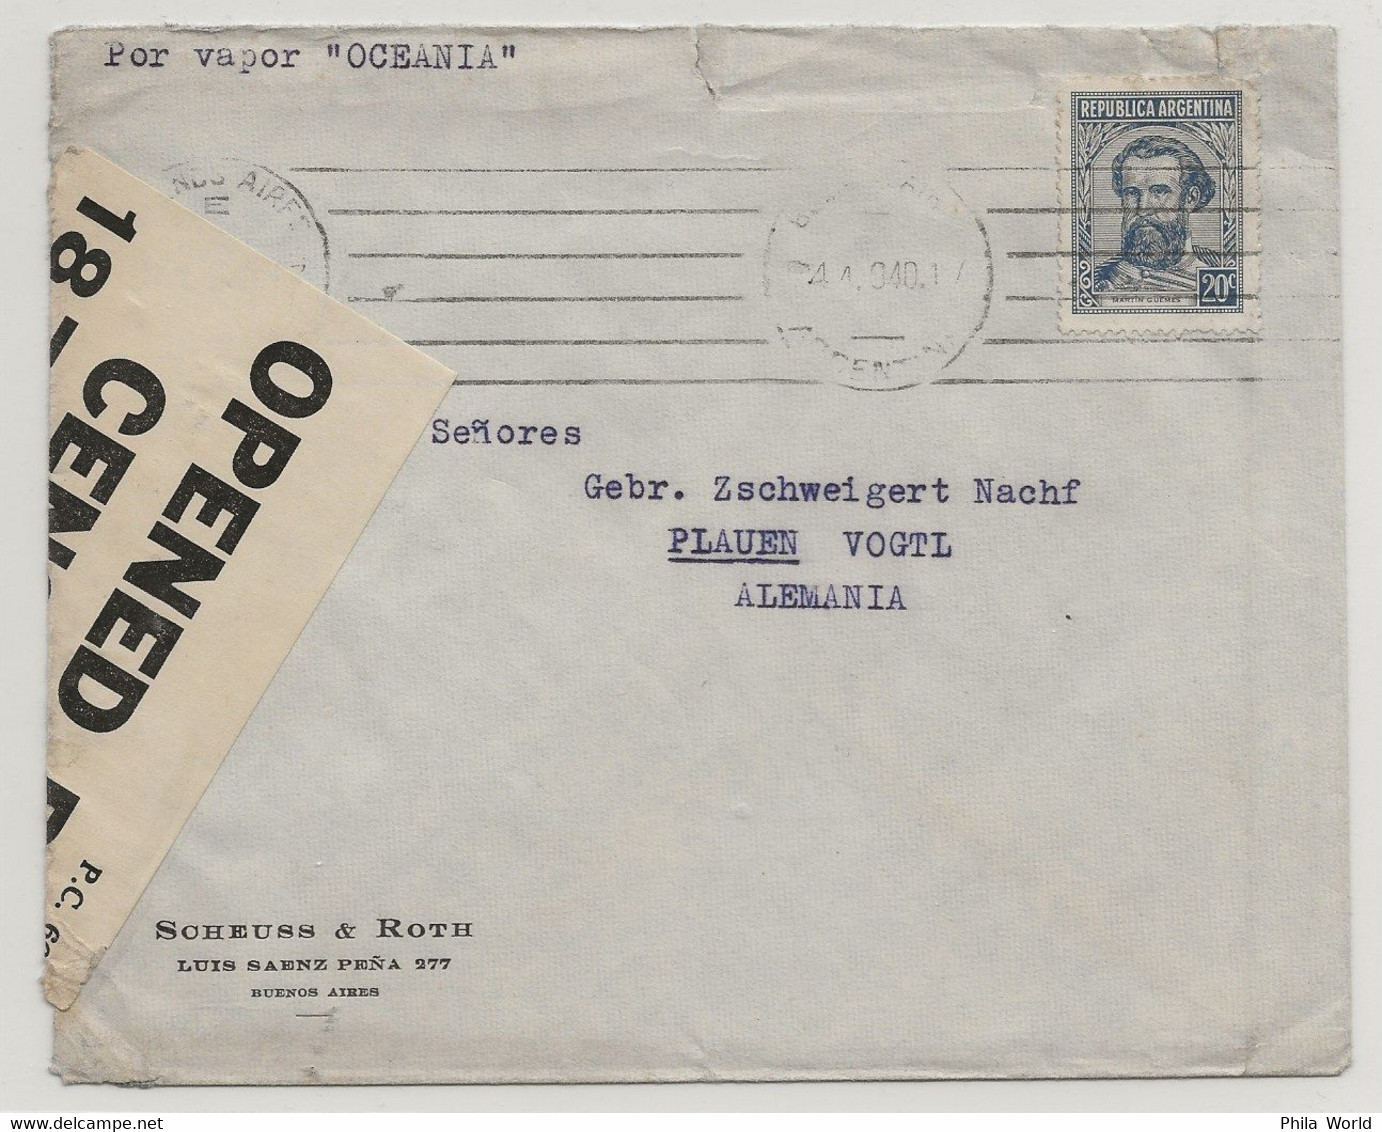 WW2 1940 ARGENTINA Por Vapor OCEANIA Maritime Mail Cover British Censorship 1878 And German Censored To GERMANY - WO2